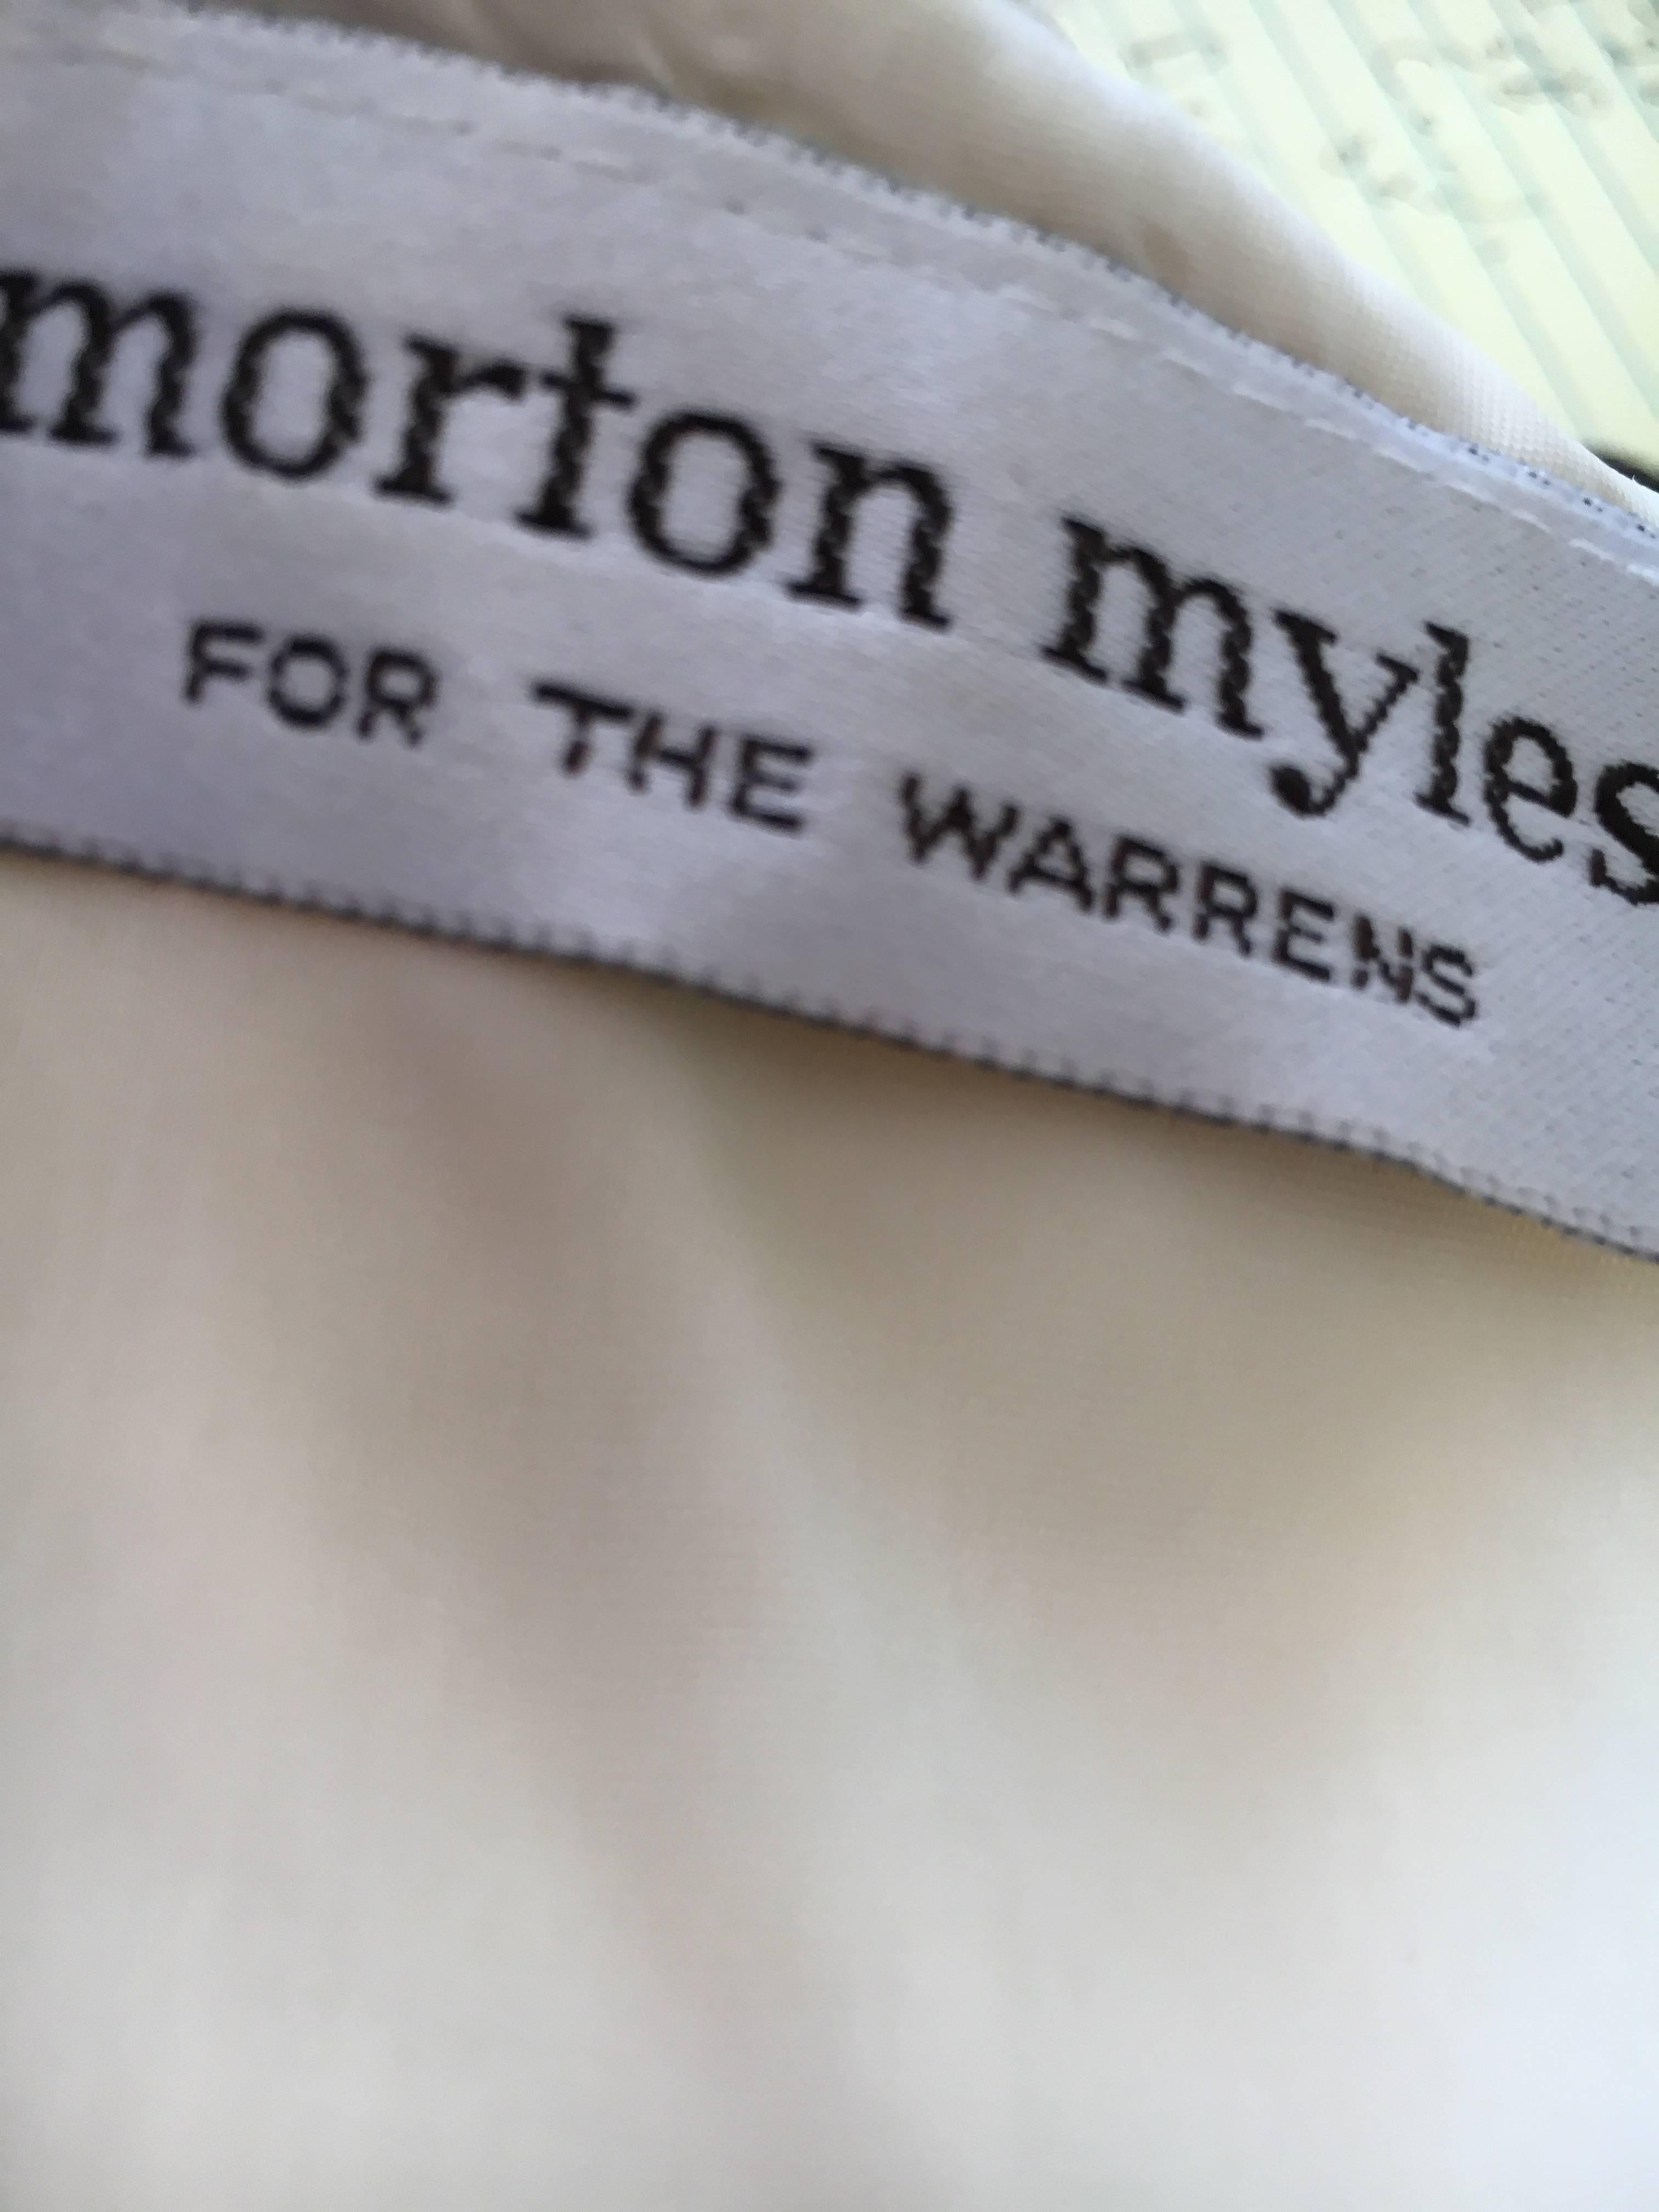 Cream Lace Cape Collar Dress from Morton Myles for the Warrens For Sale 2